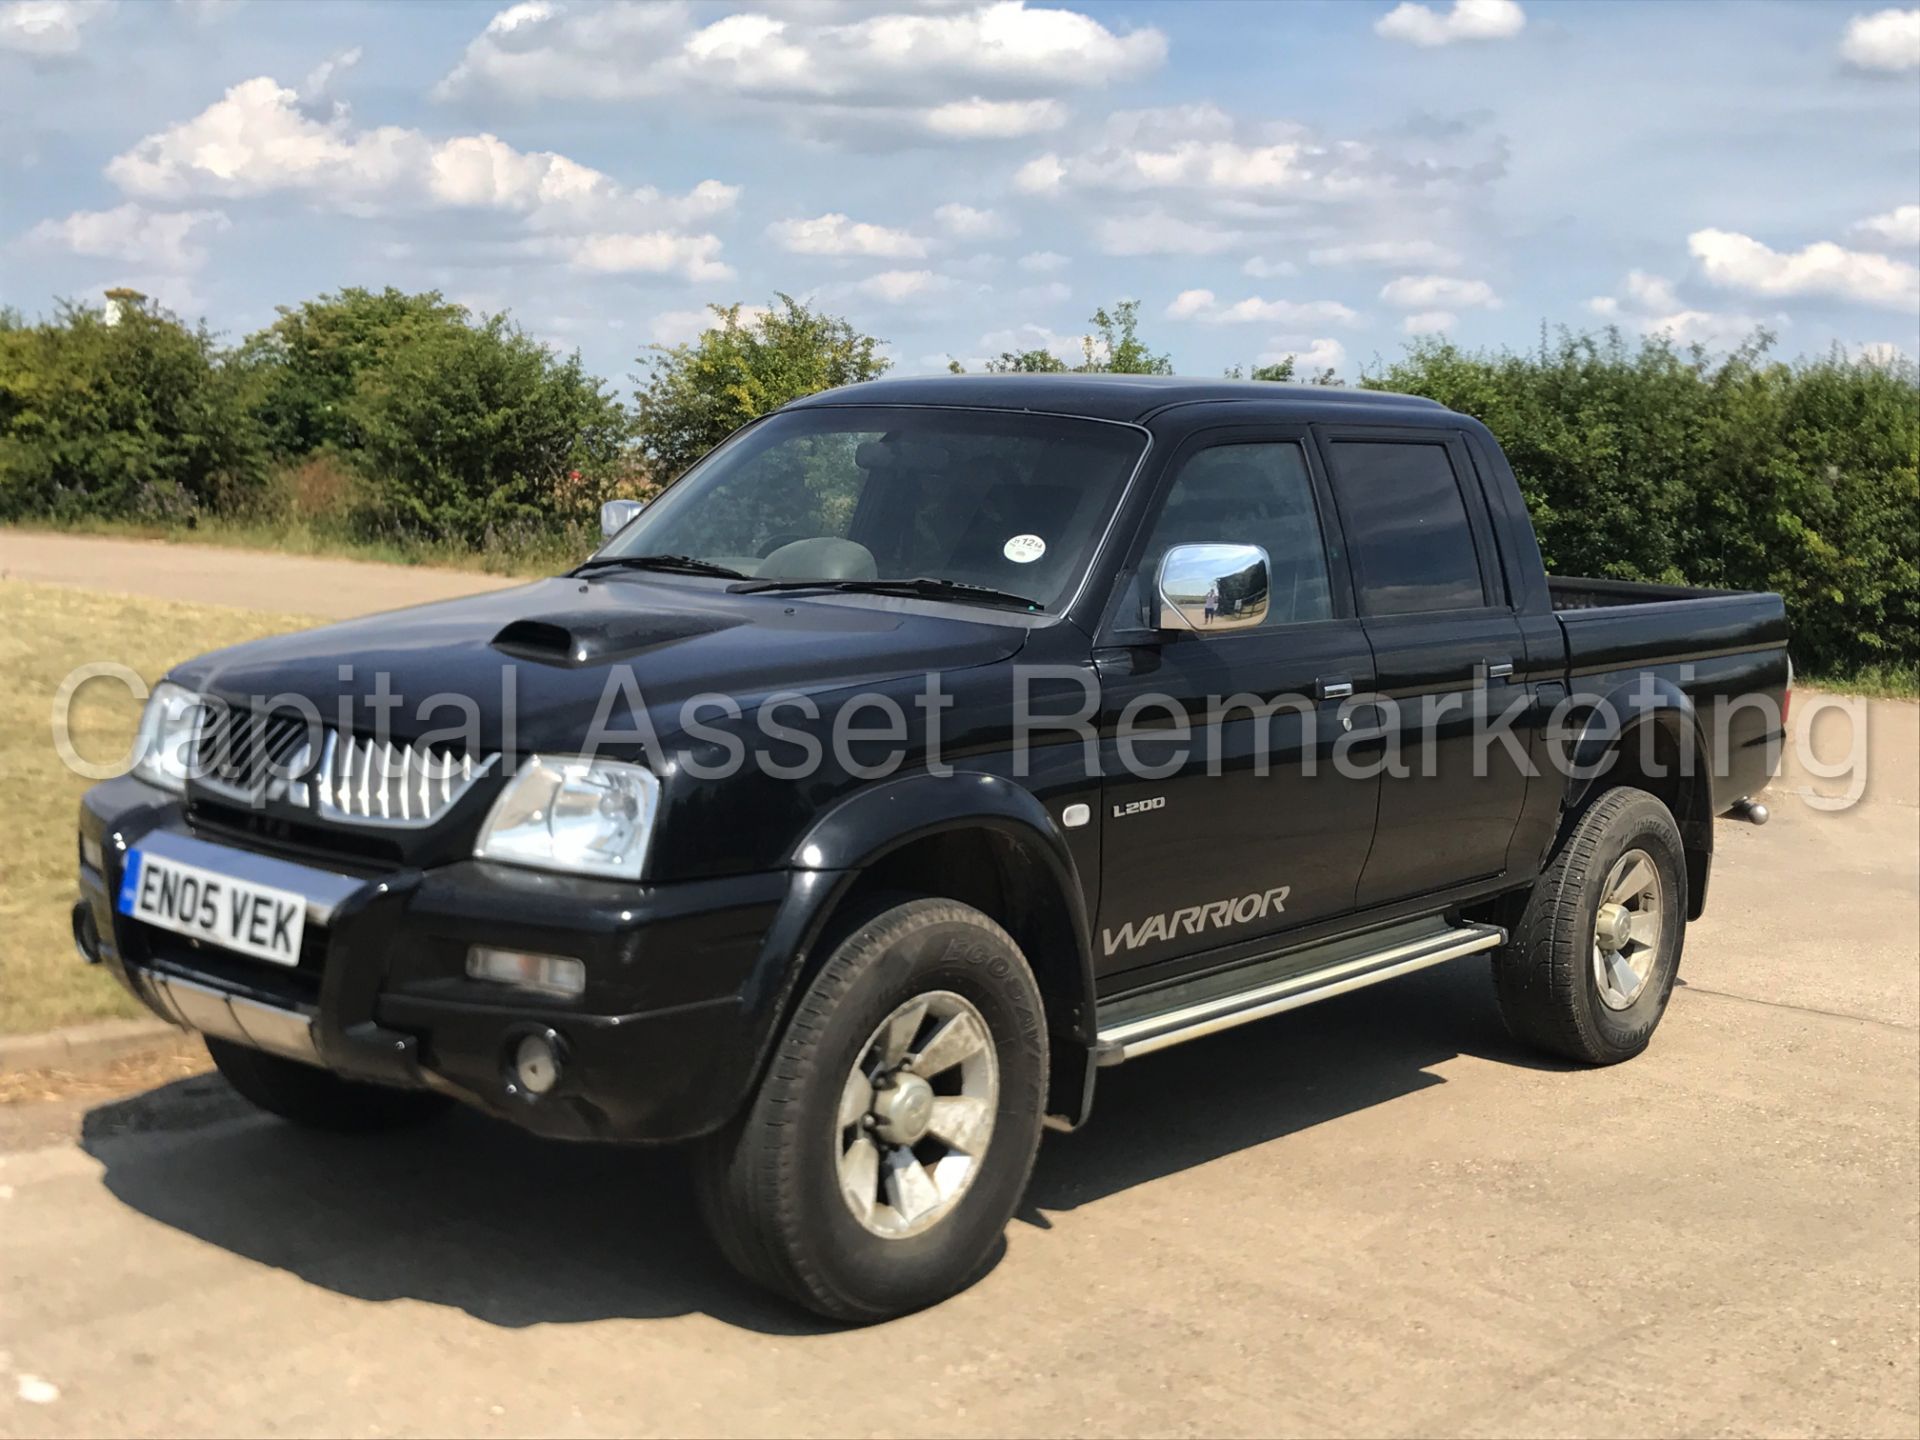 (On Sale) MITSUBISHI L200 'WARRIOR' DOUBLE CAB PICK-UP (2005) '2.5 DIESEL - AIR CON' (NO VAT) - Image 5 of 25